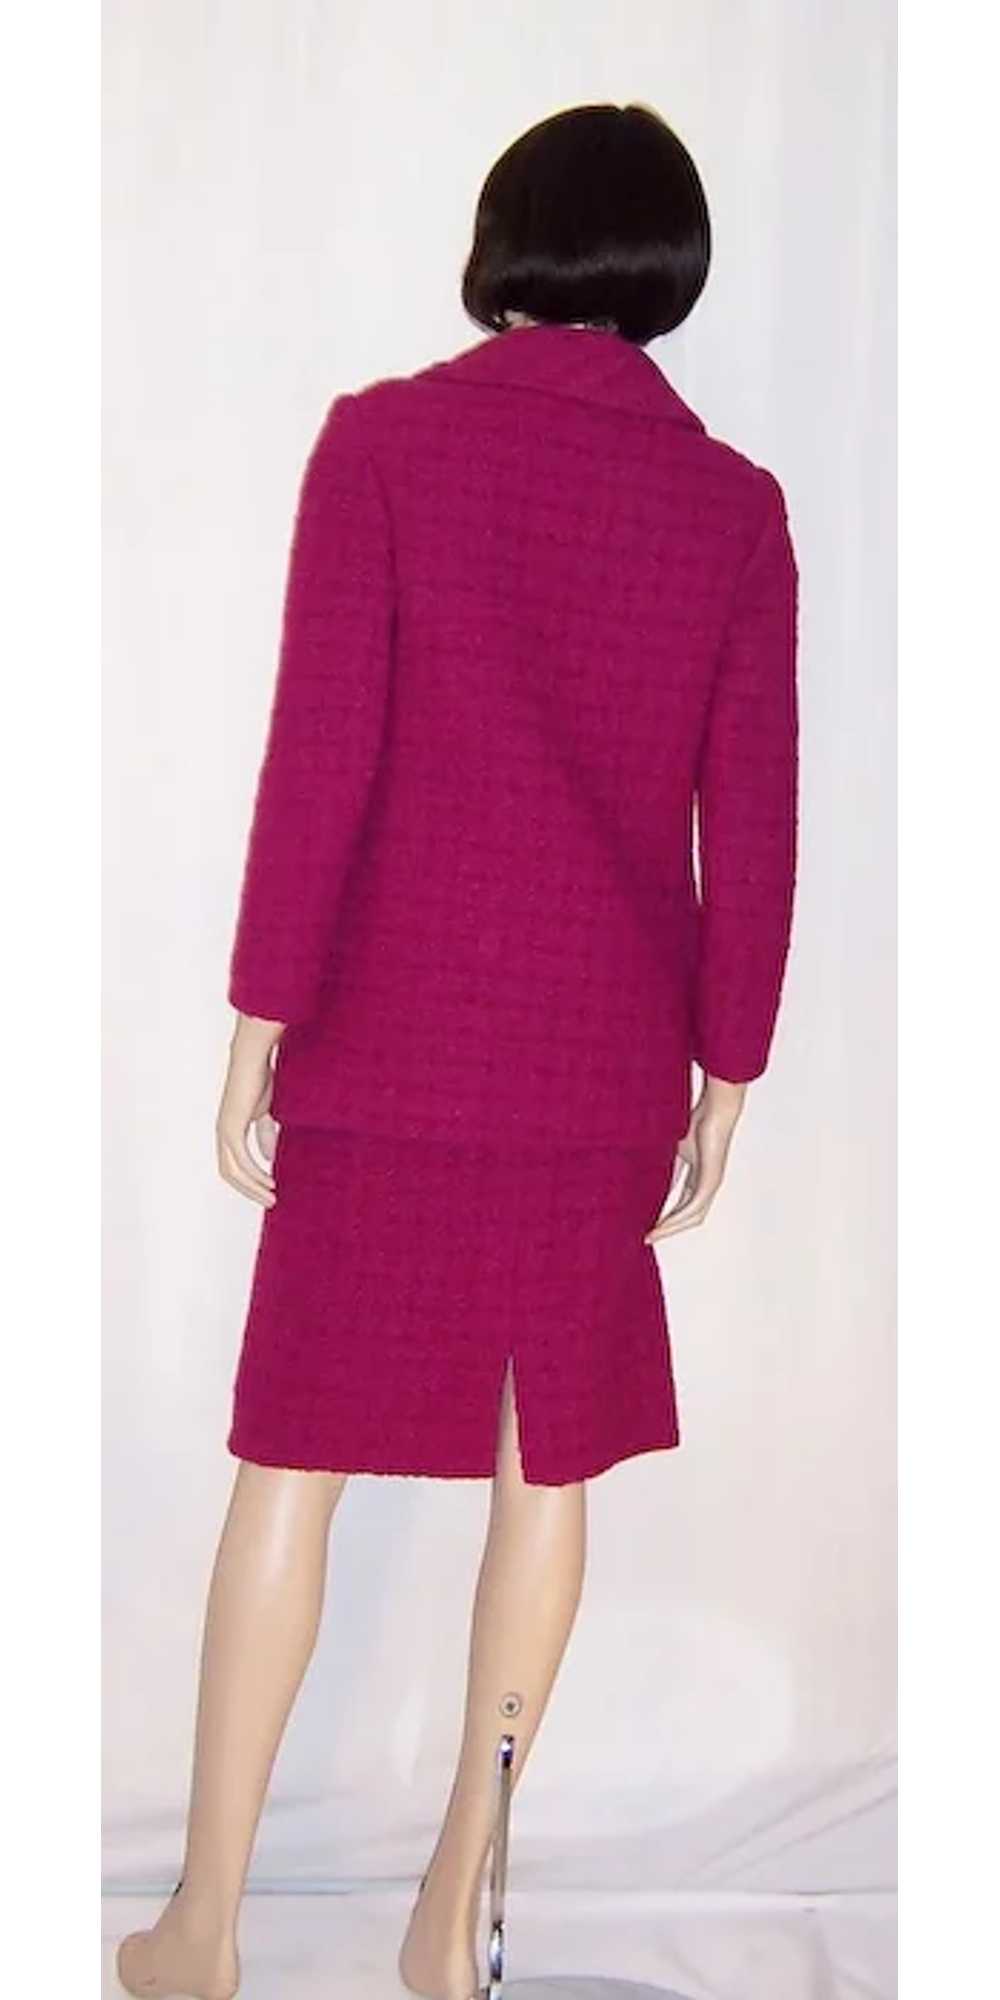 Stylish & Gorgeous Red Raspberry Nubby Woolen Suit - image 3